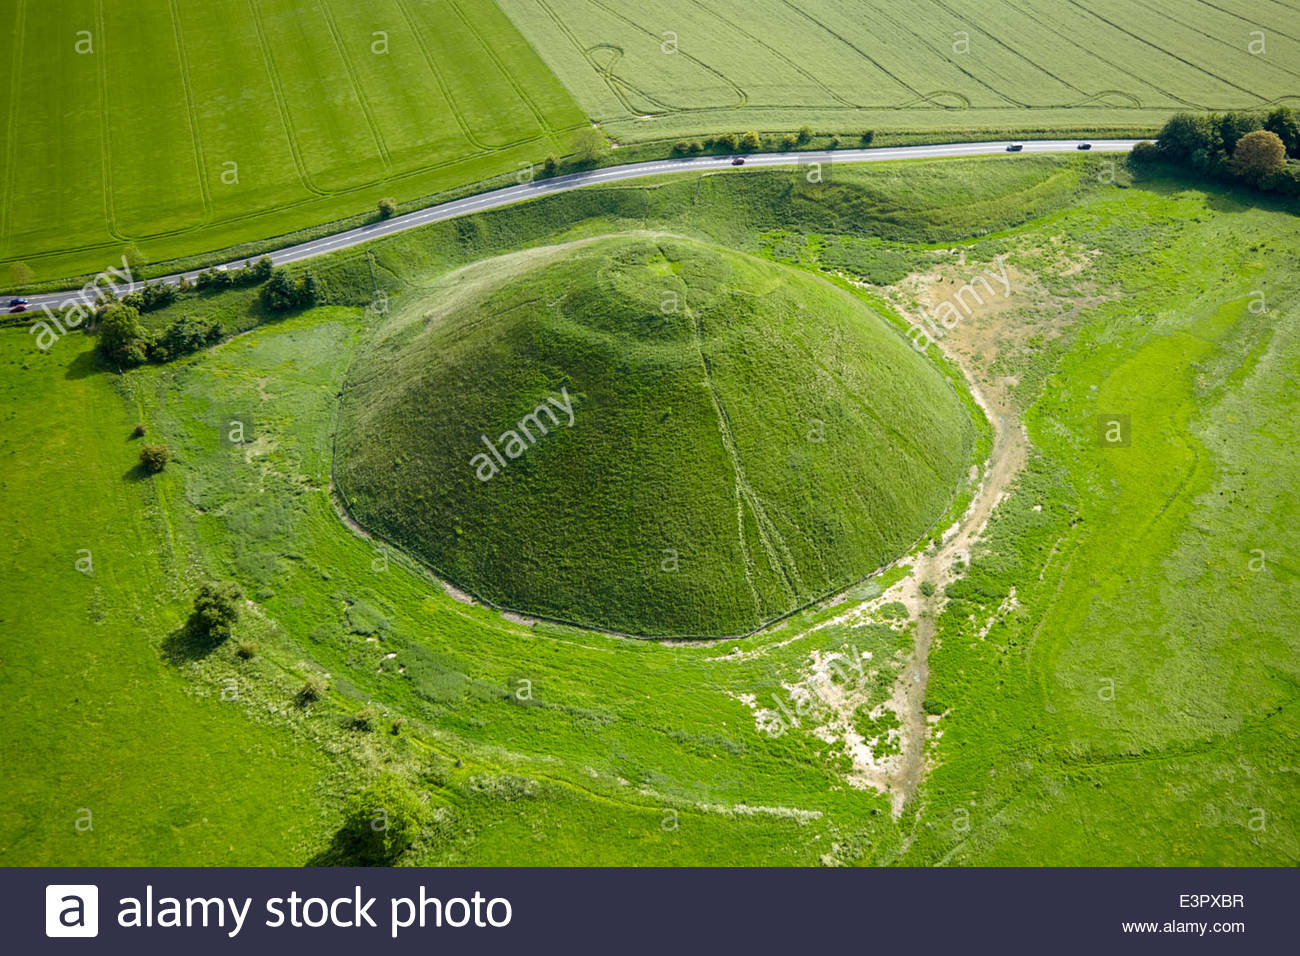 Image result for avebury silbury images